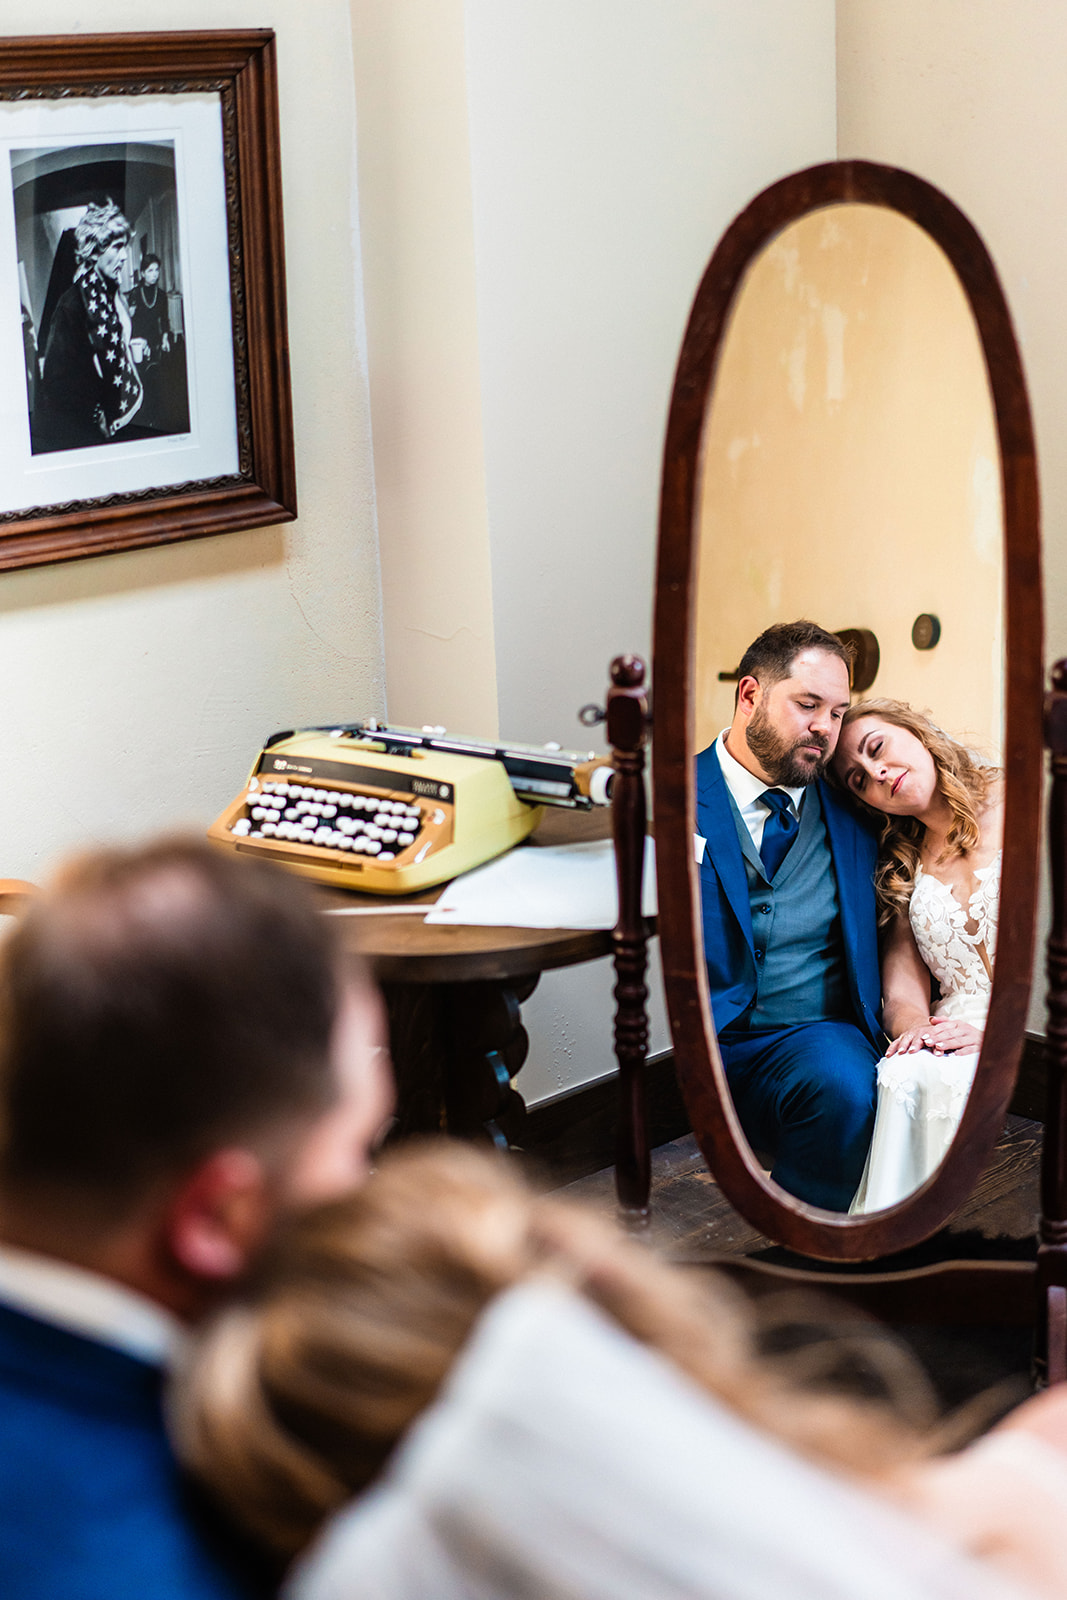 Bride and groom sitting together looking in a mirror